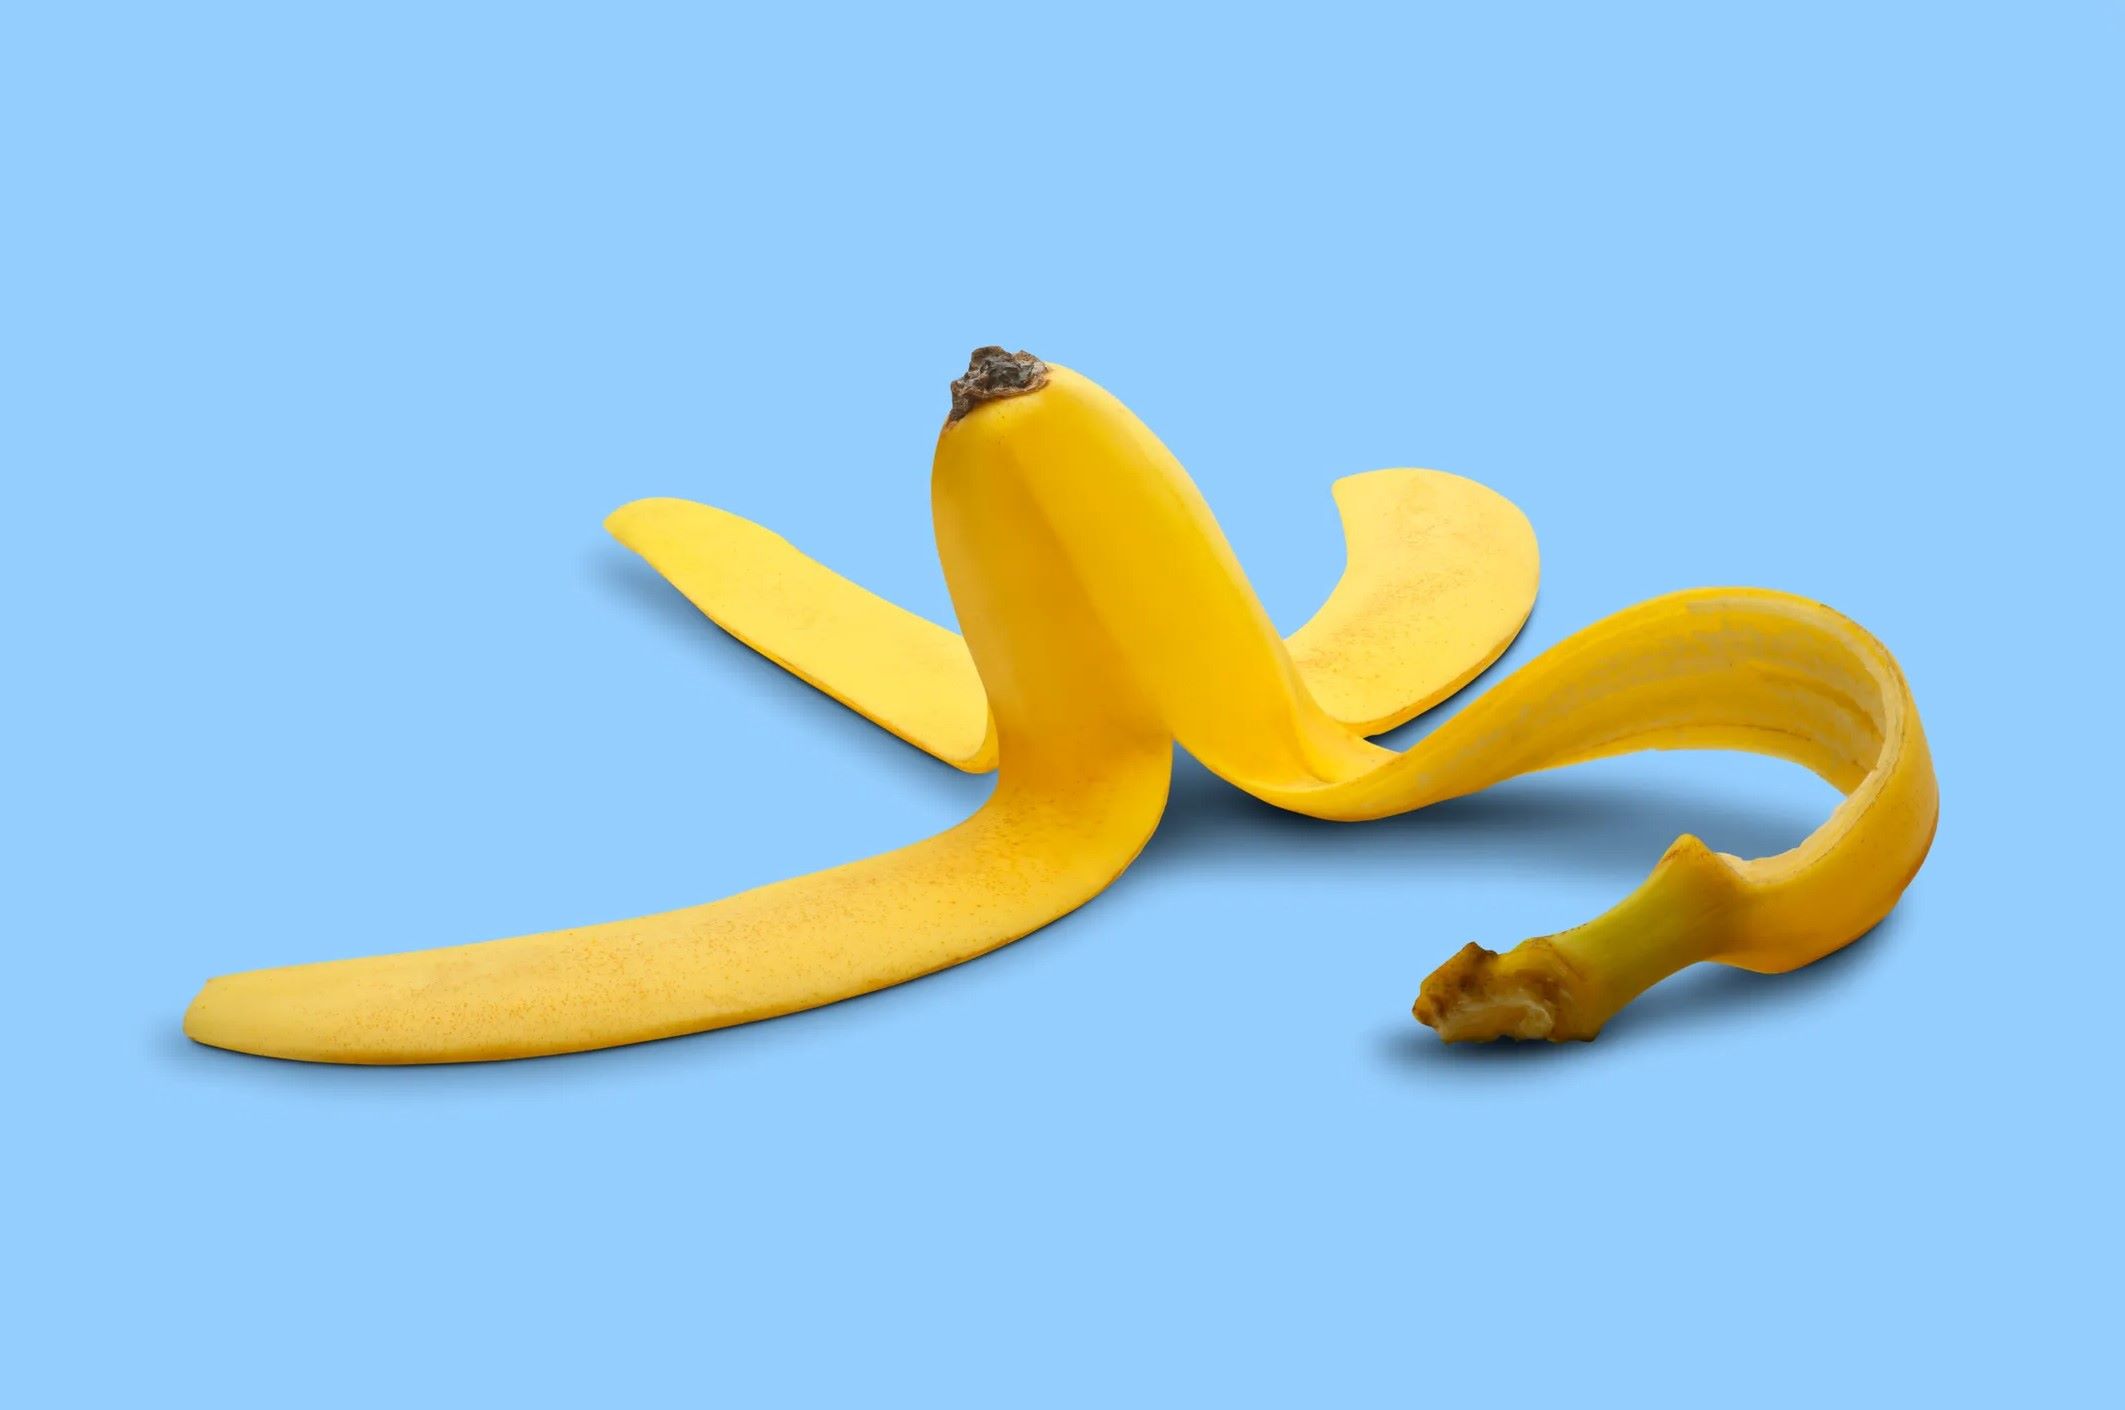 7 Benefits Of Incorporating Banana Peels Into Your Diet